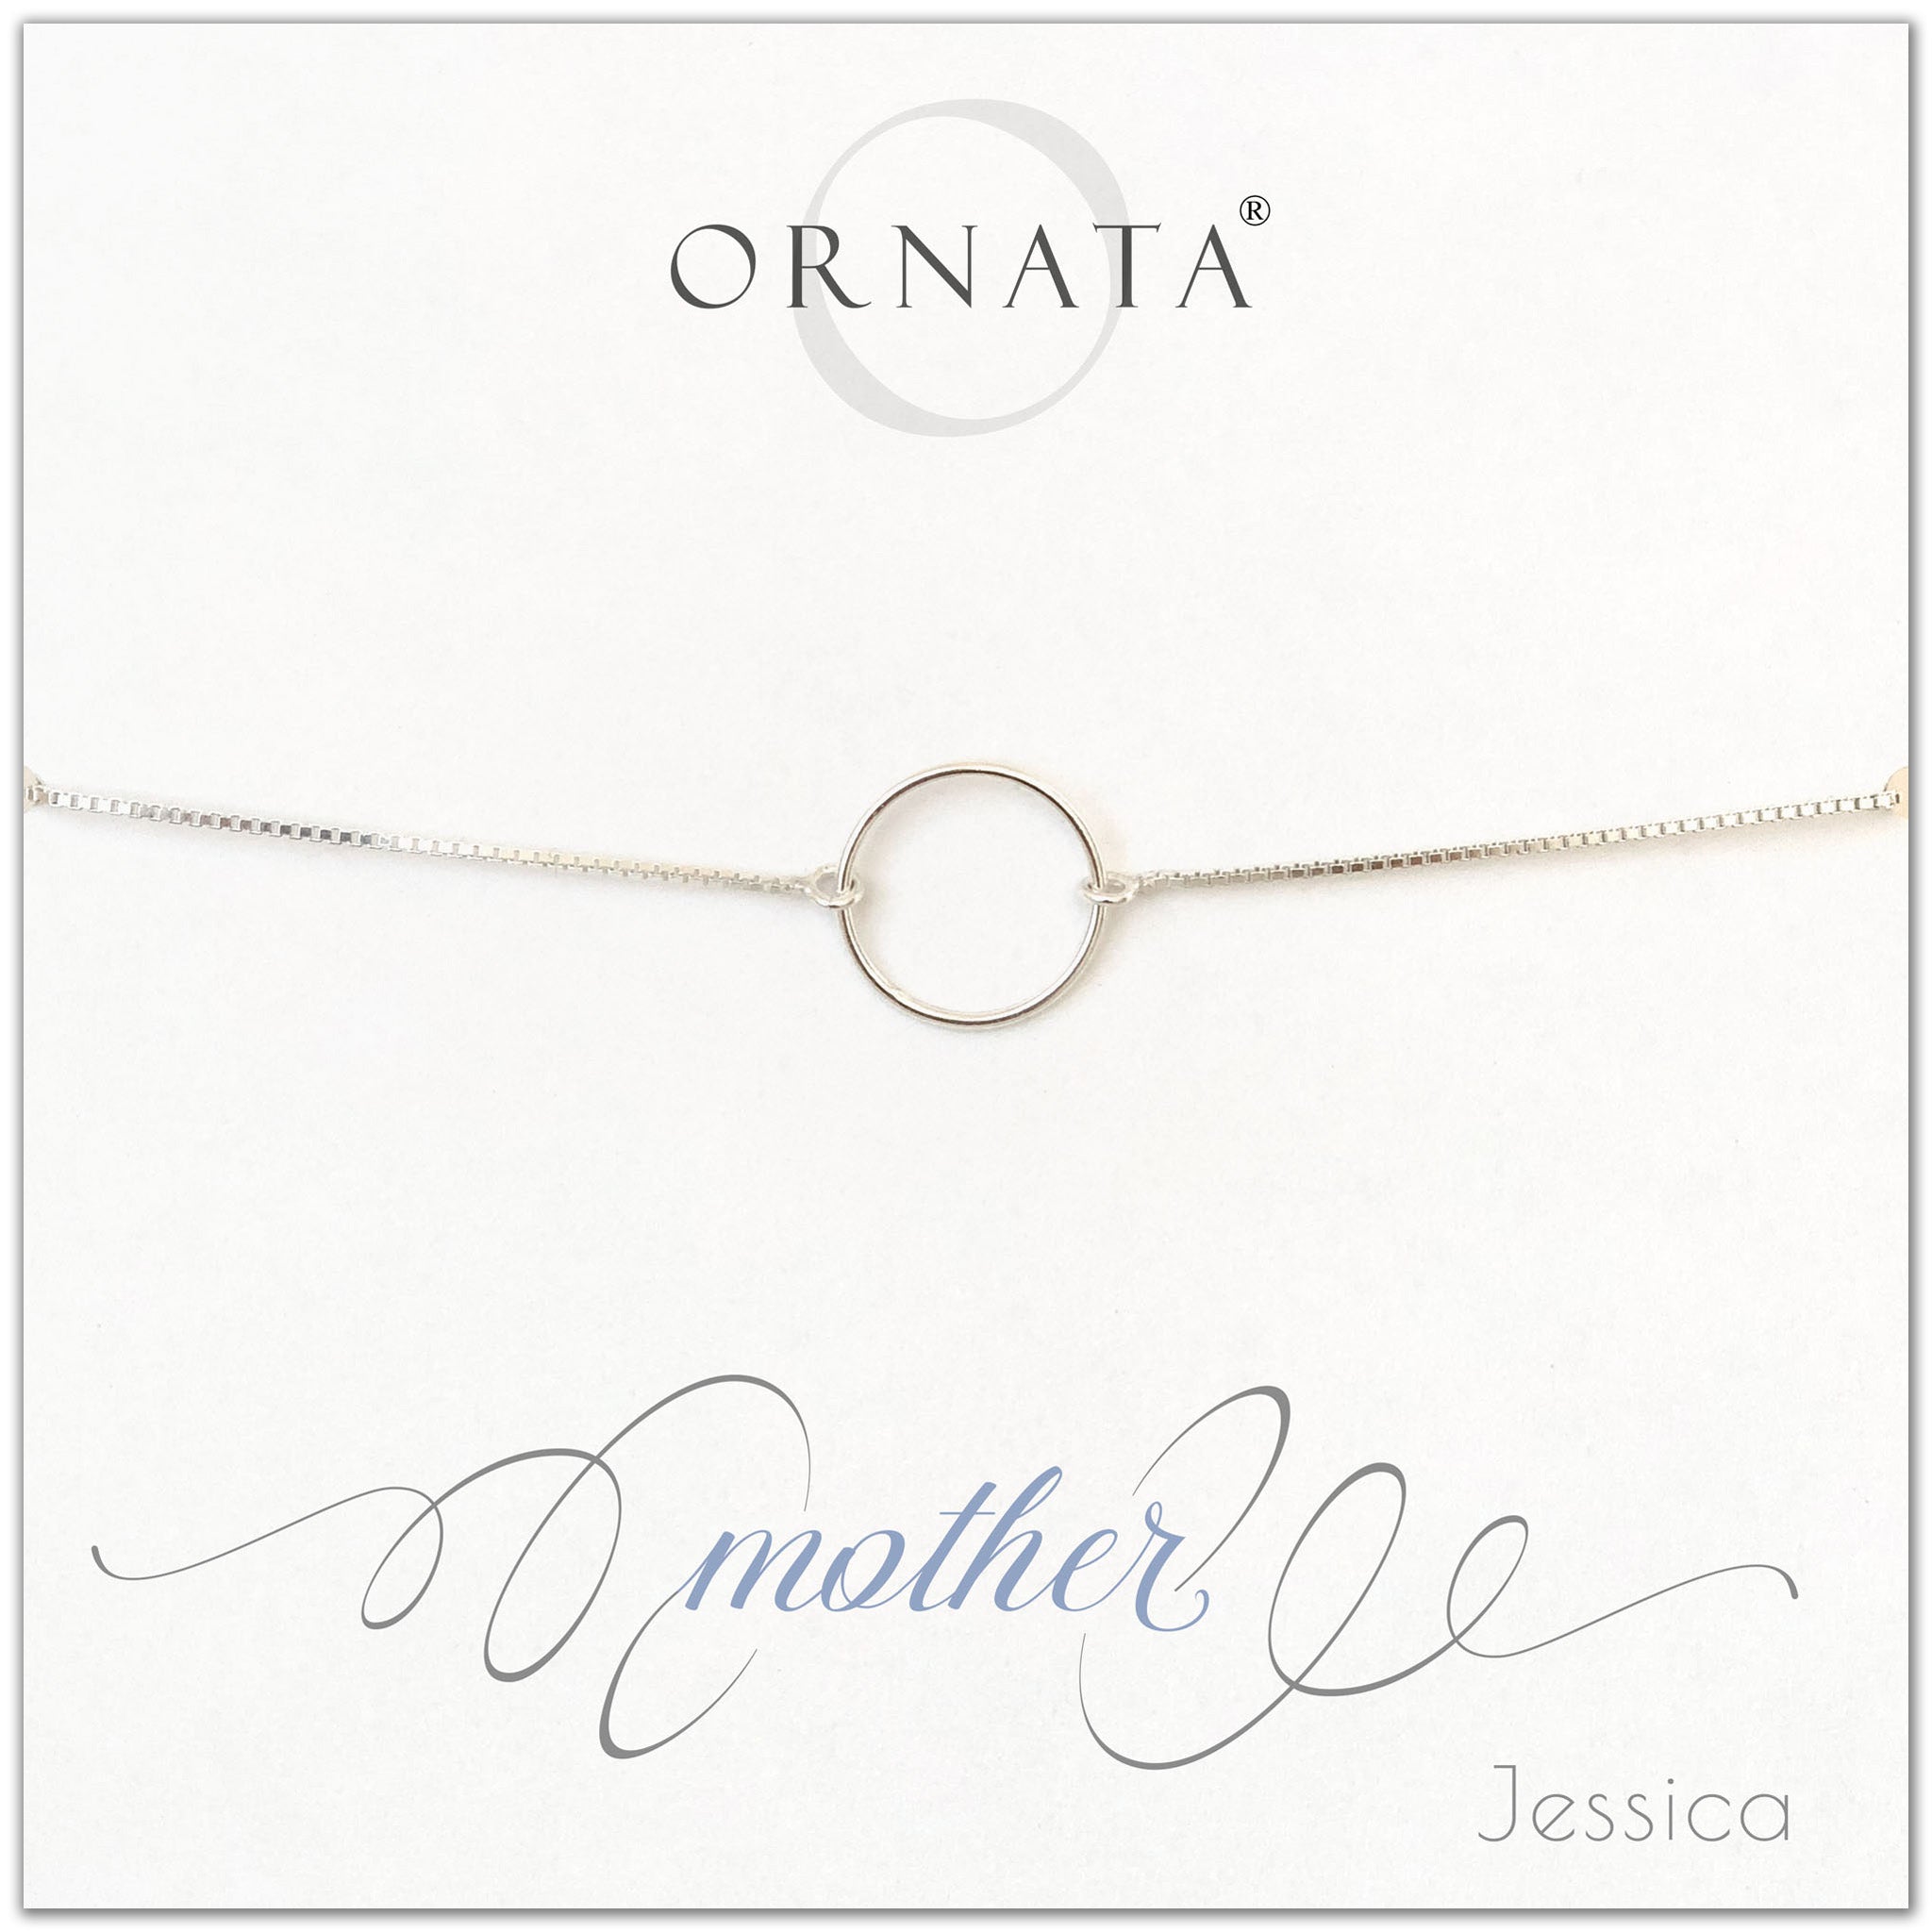 Mother personalized sterling silver bolo bracelet. Our custom bracelets make good gifts for moms and family. Great mother’s day gift.